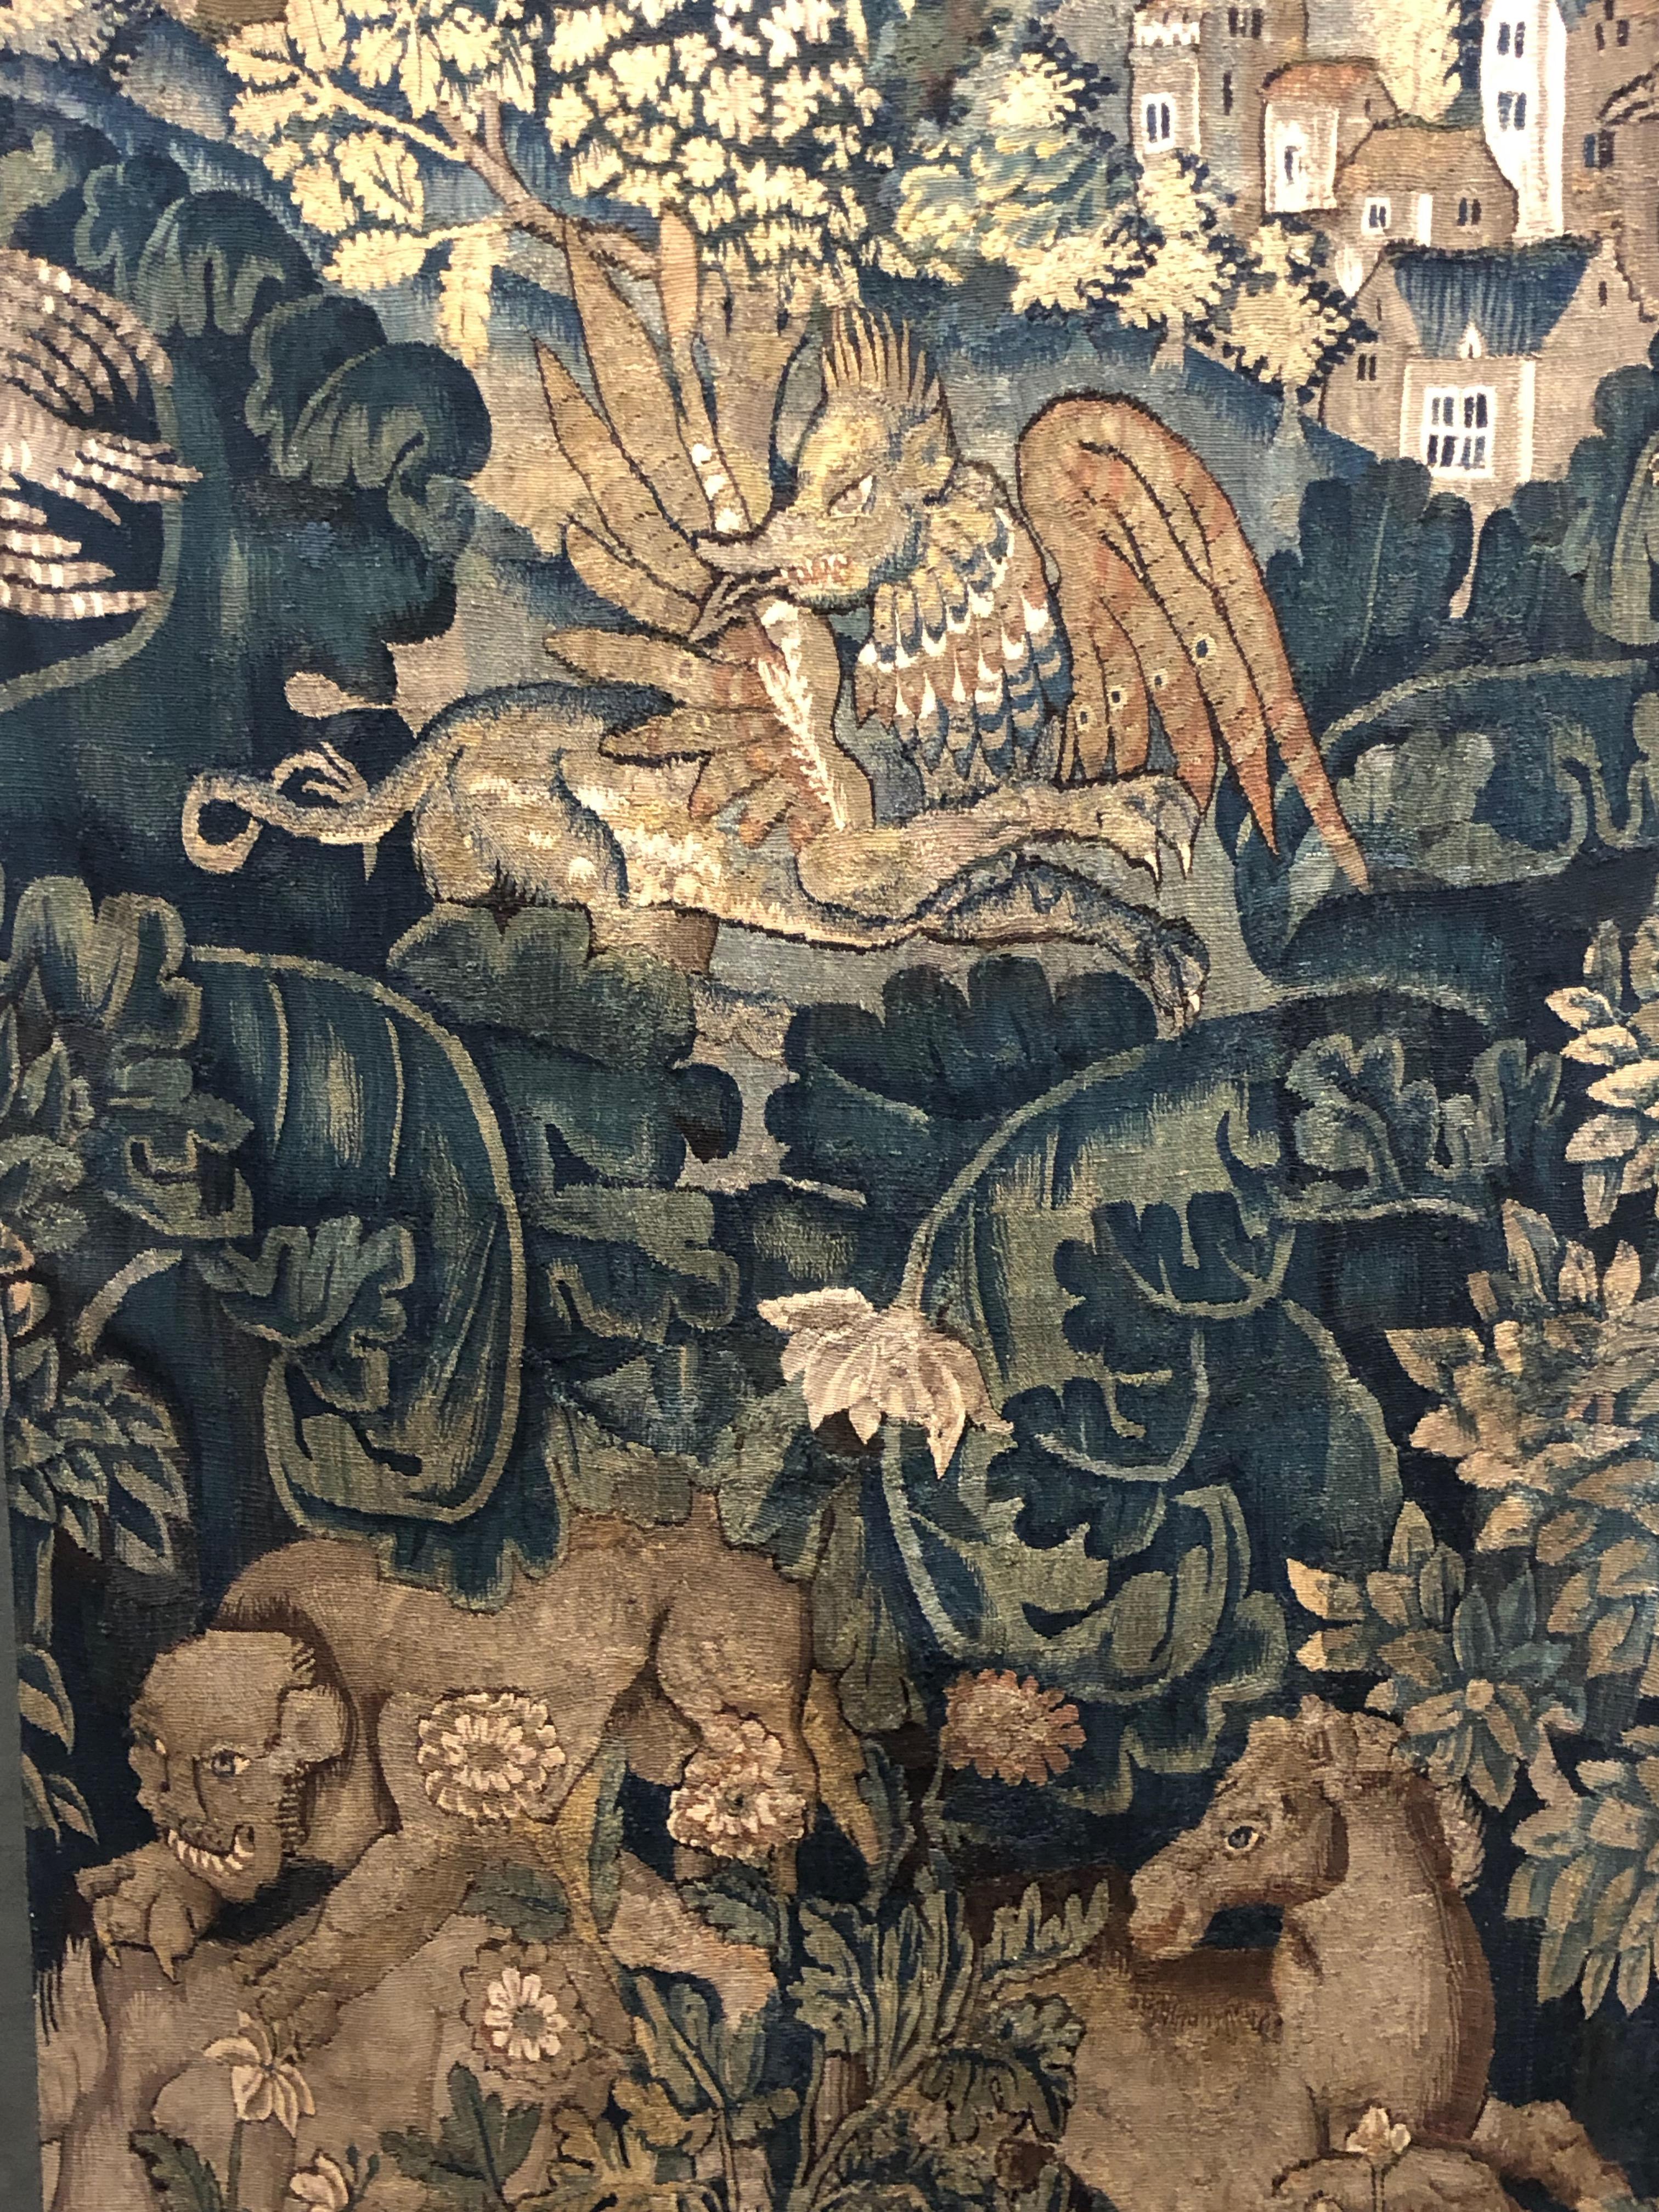 16th century Flemish Verdure Feuilles de Choux tapestry panel. 
Feuilles de Choux (trans. cabbage leaves) tapestry include large leaves in an overall, often wild motif with animals of the hunt or exotic creatures admired for their beauty and